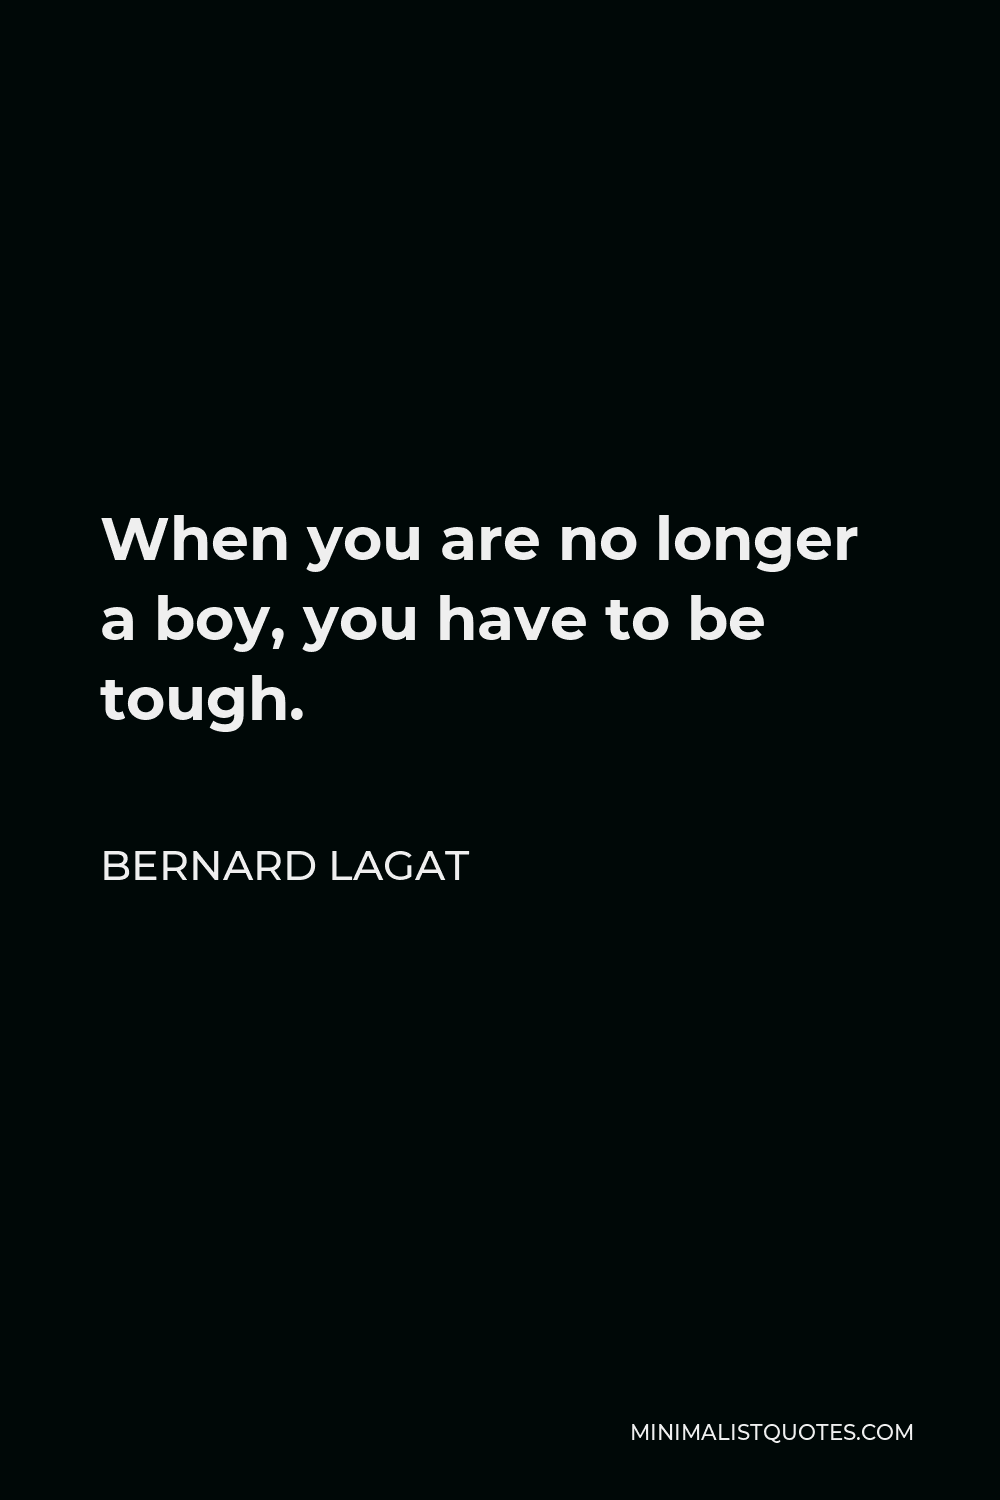 Bernard Lagat Quote - When you are no longer a boy, you have to be tough.